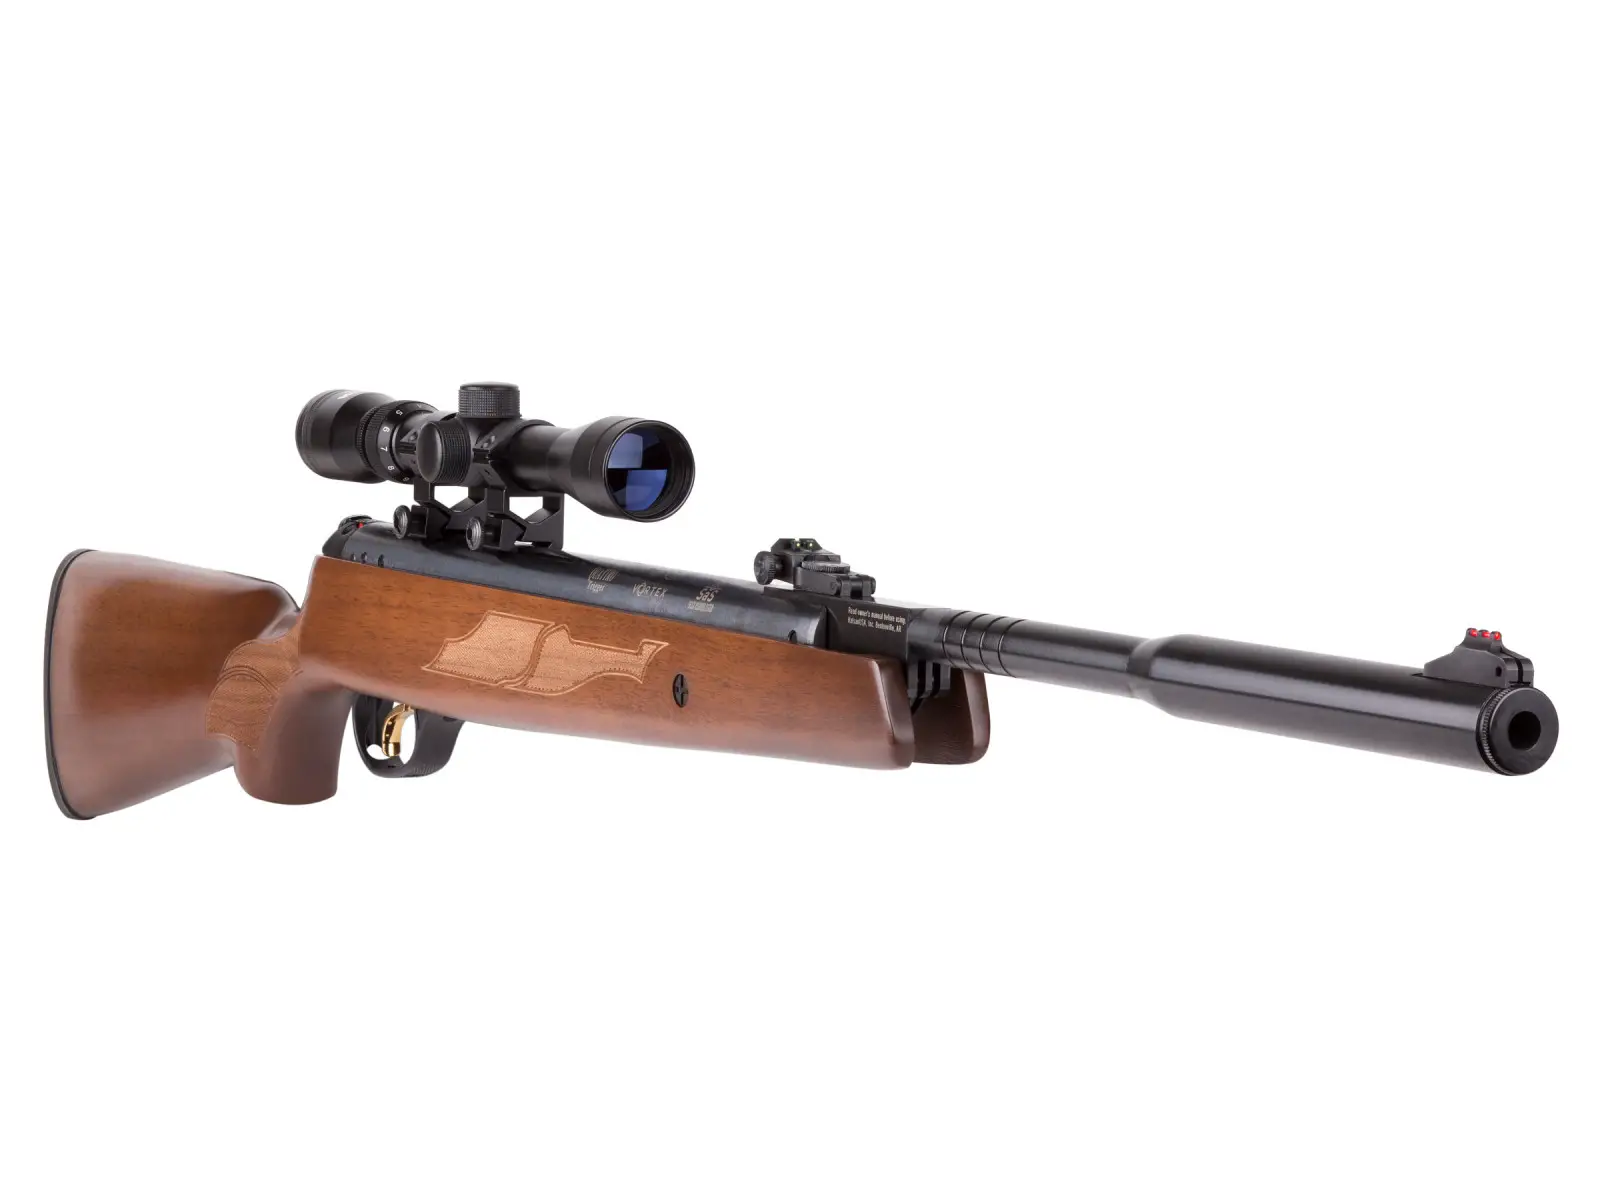 951 Best .22 Air Rifles - Top 10 fantastic guns for the money (Reviews and Buying Guide 2023)